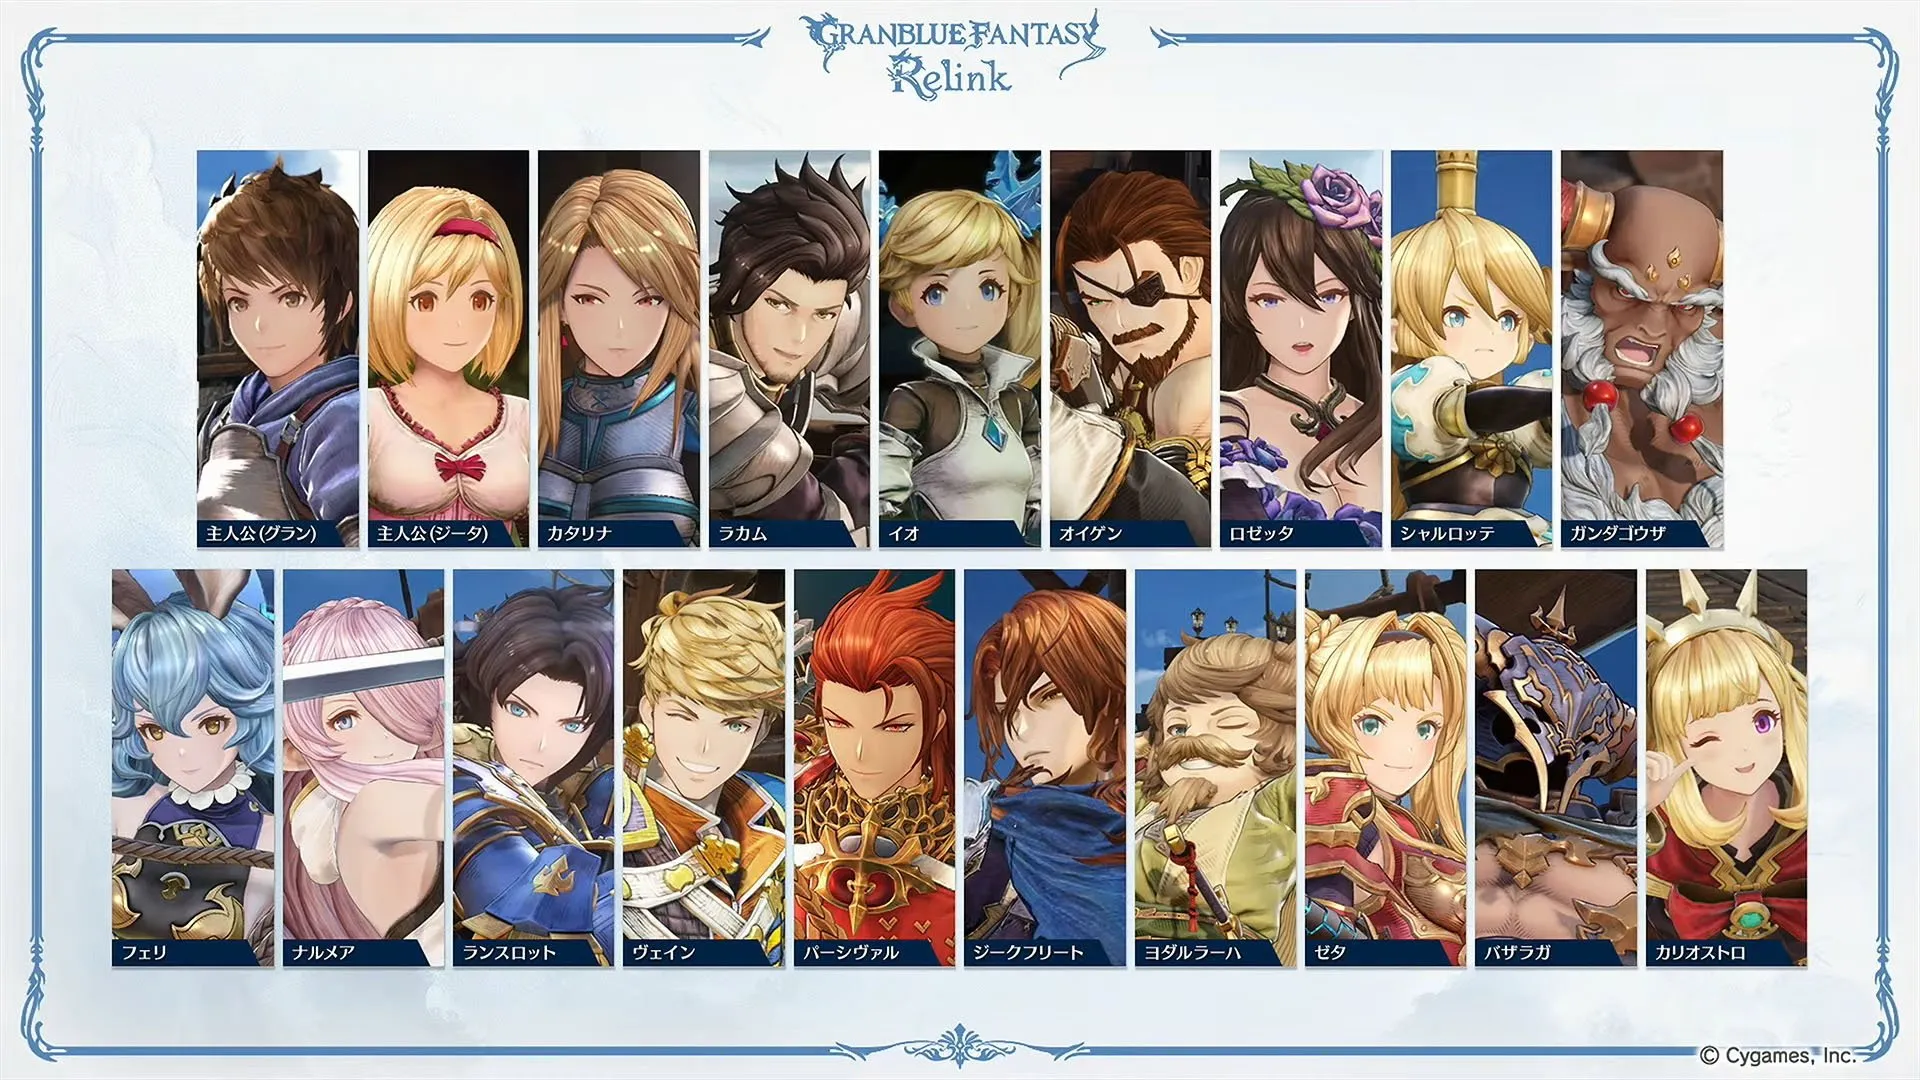 How To Unlock All Characters In Granblue Fantasy Relink